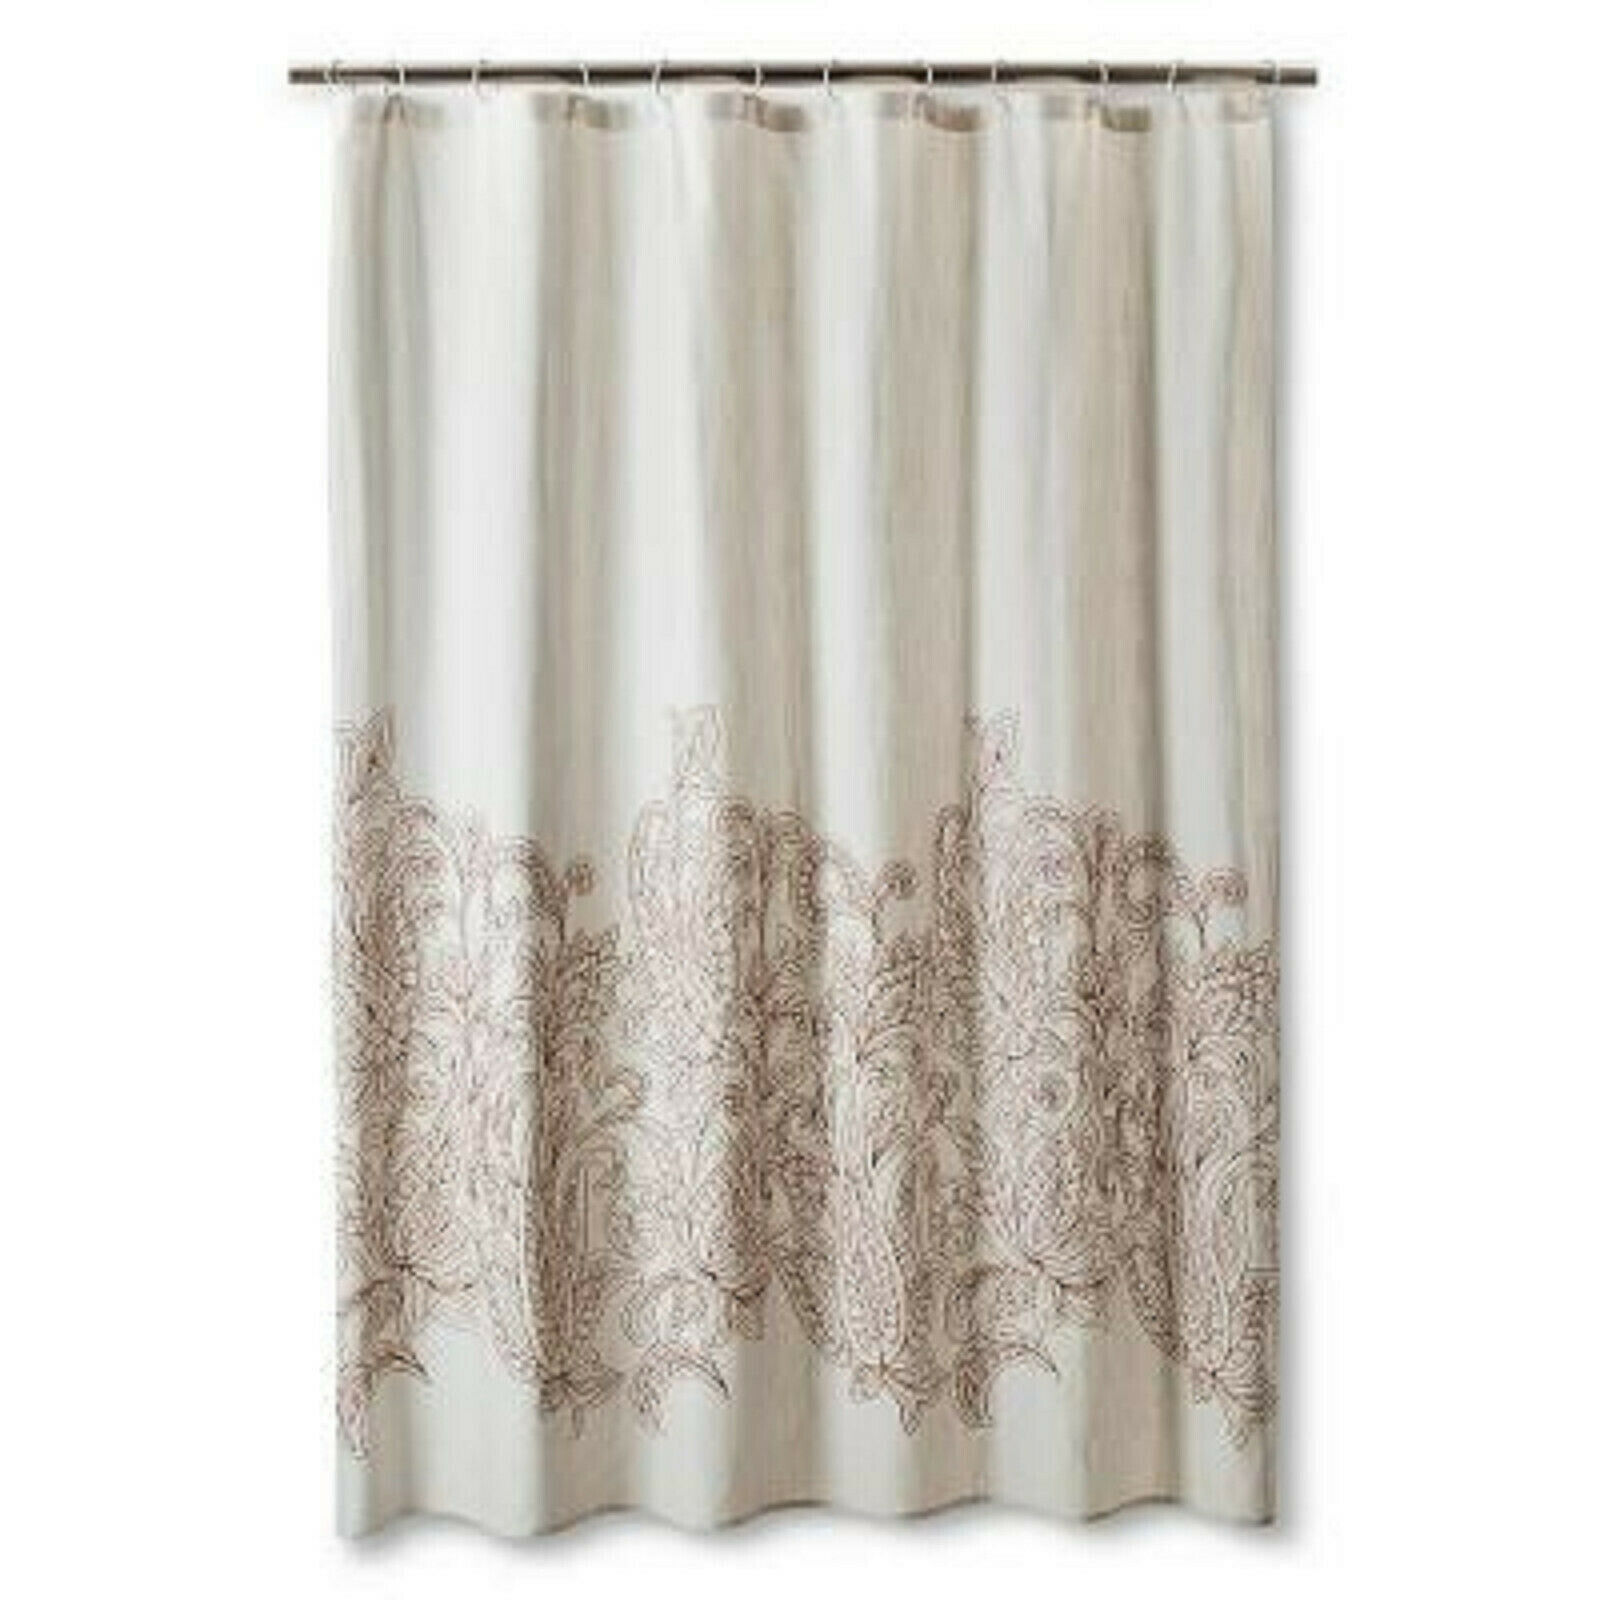 Primary image for Threshold Kareem Ivory With Embroidered Toffee Paisley Shower Curtain 72 x 72